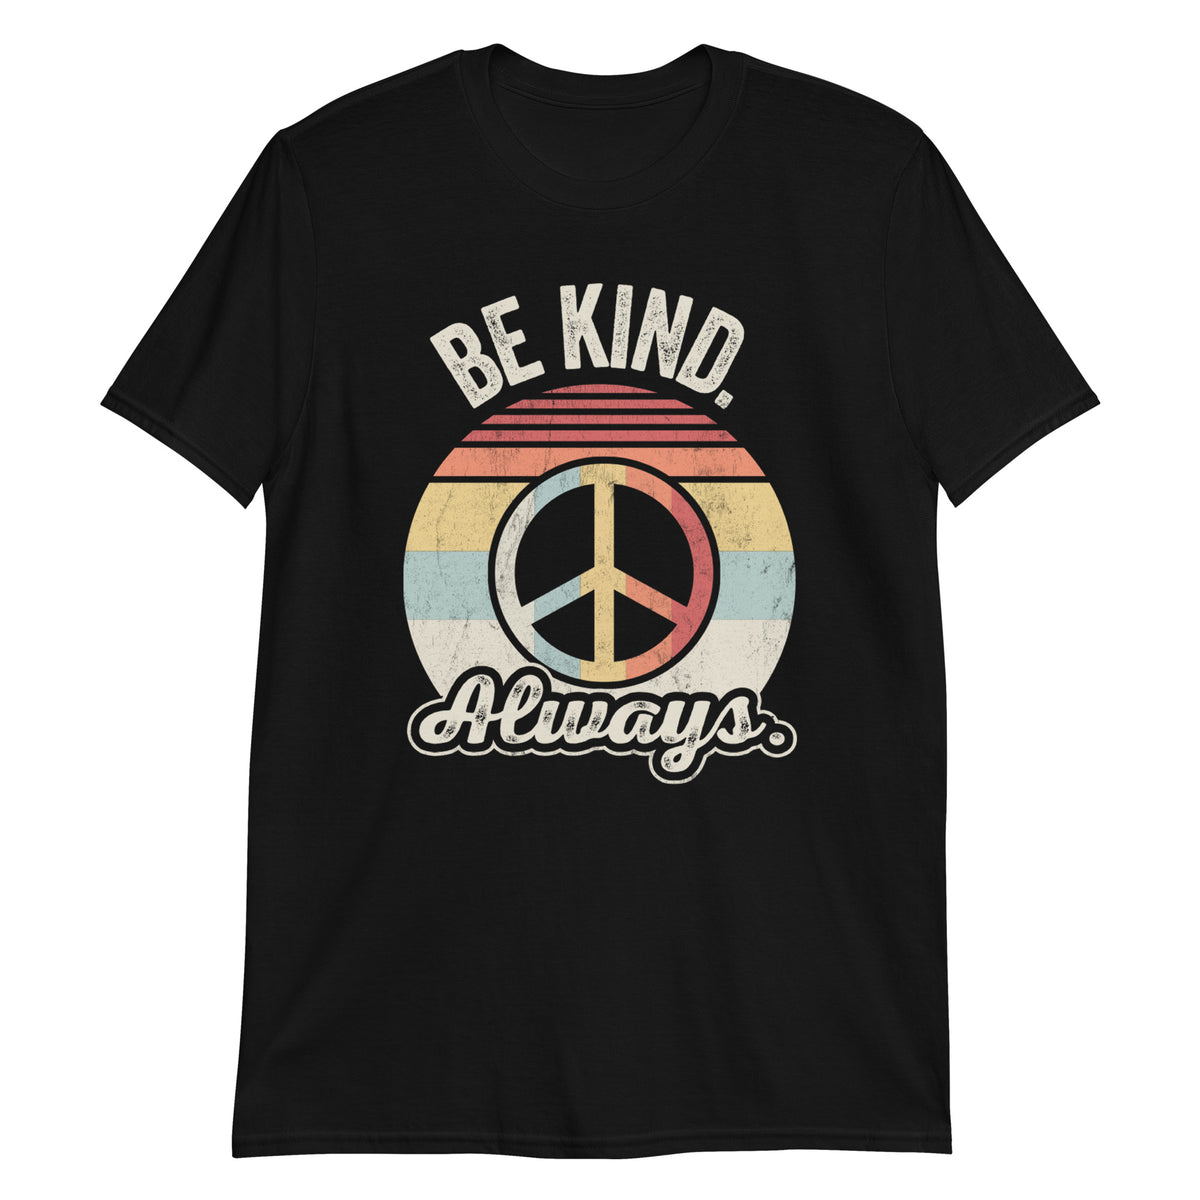 Be Kind Always Retro Style Vintage Peace Love T-Shirt